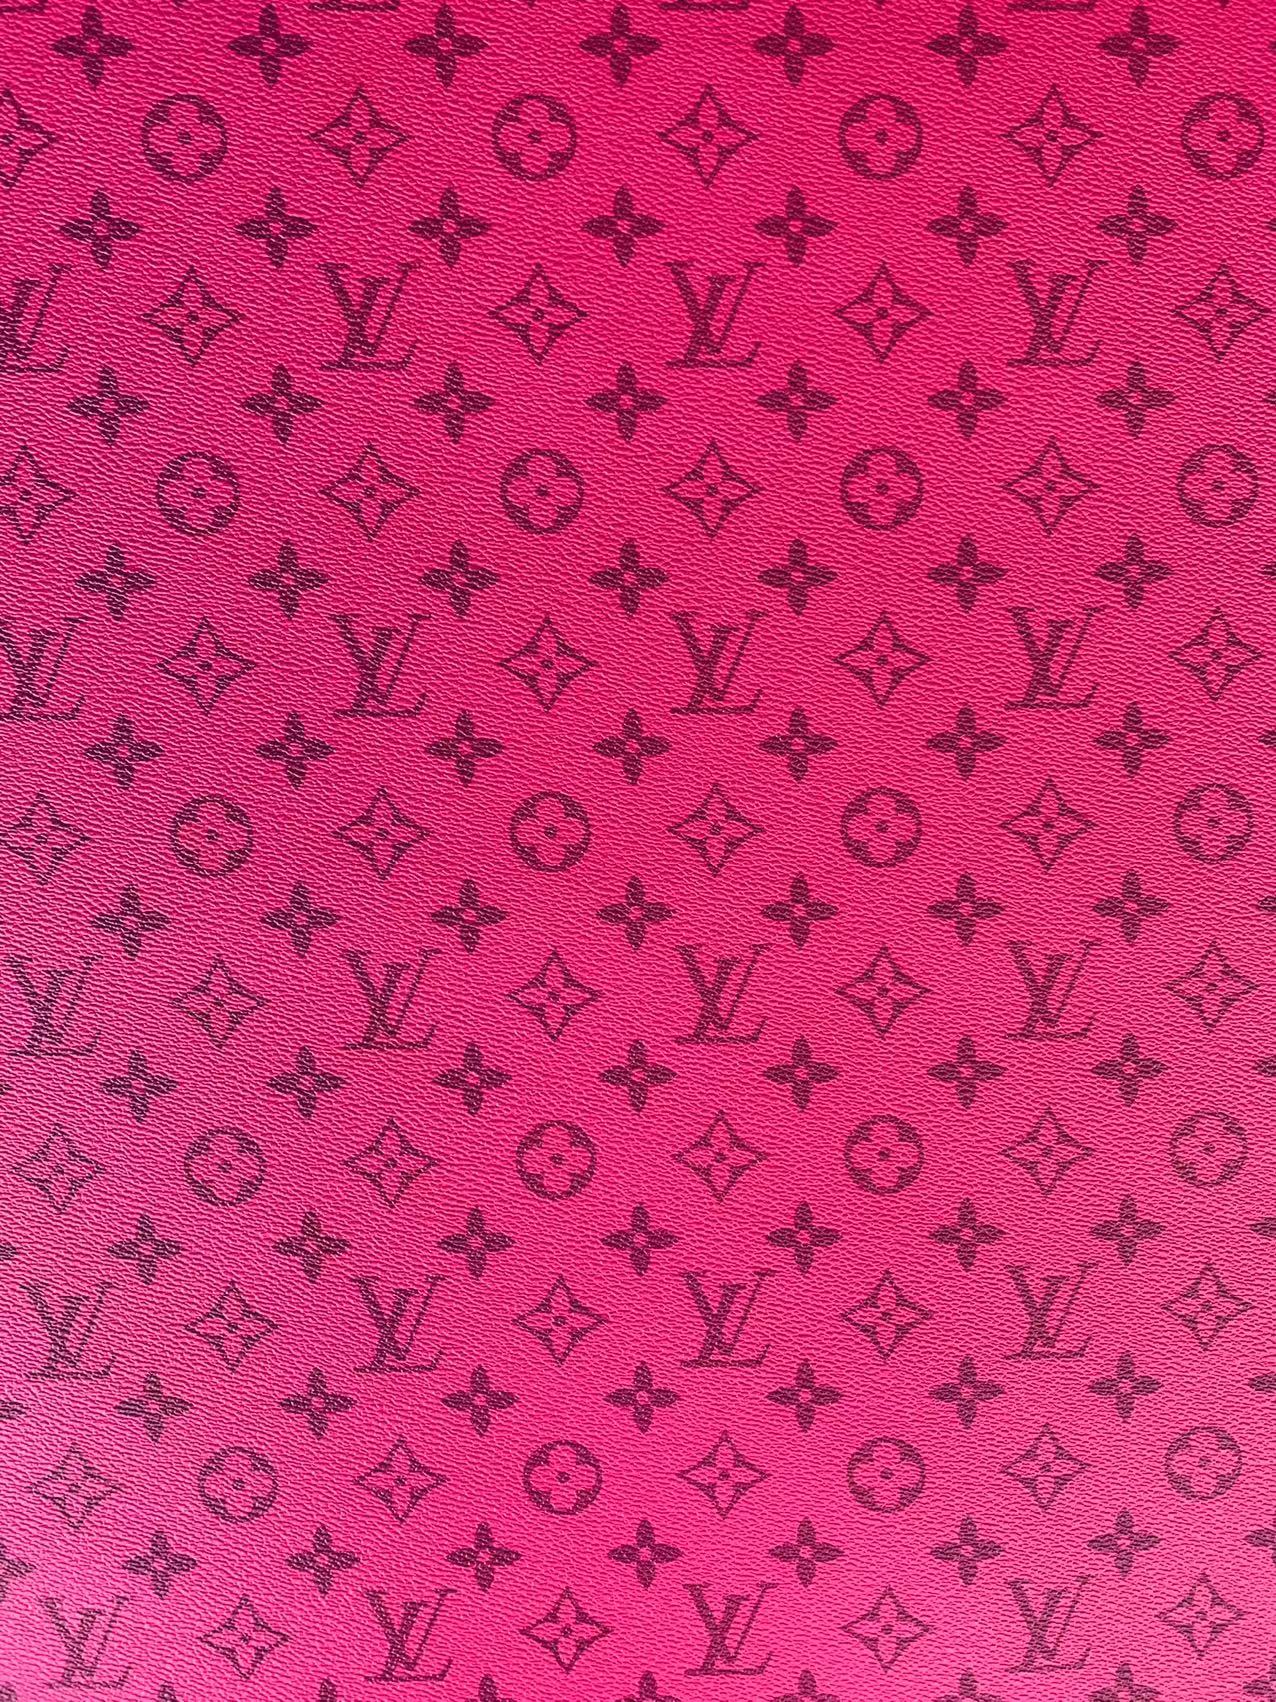 Classic LV Dark Pink crafting leather fabric For Handmade Bag ,DIY shoes ,Handmade Car leather ,Fashion Furniture LV Vinyl Leather By Yards